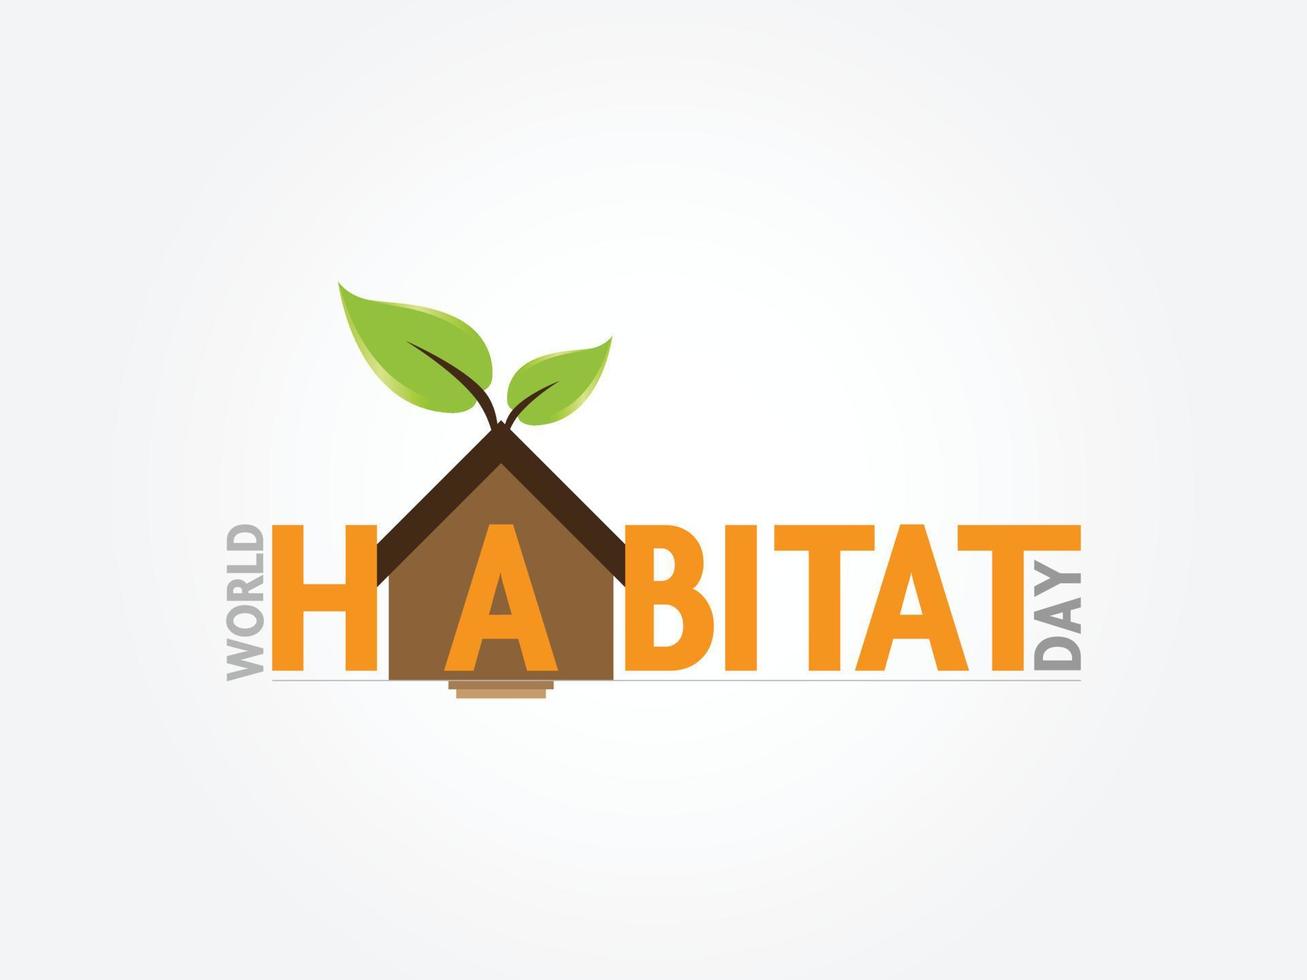 Vector illustration concept elements for World Habitat Day. Suitable for greeting cards, posters, logos, banners, etc.